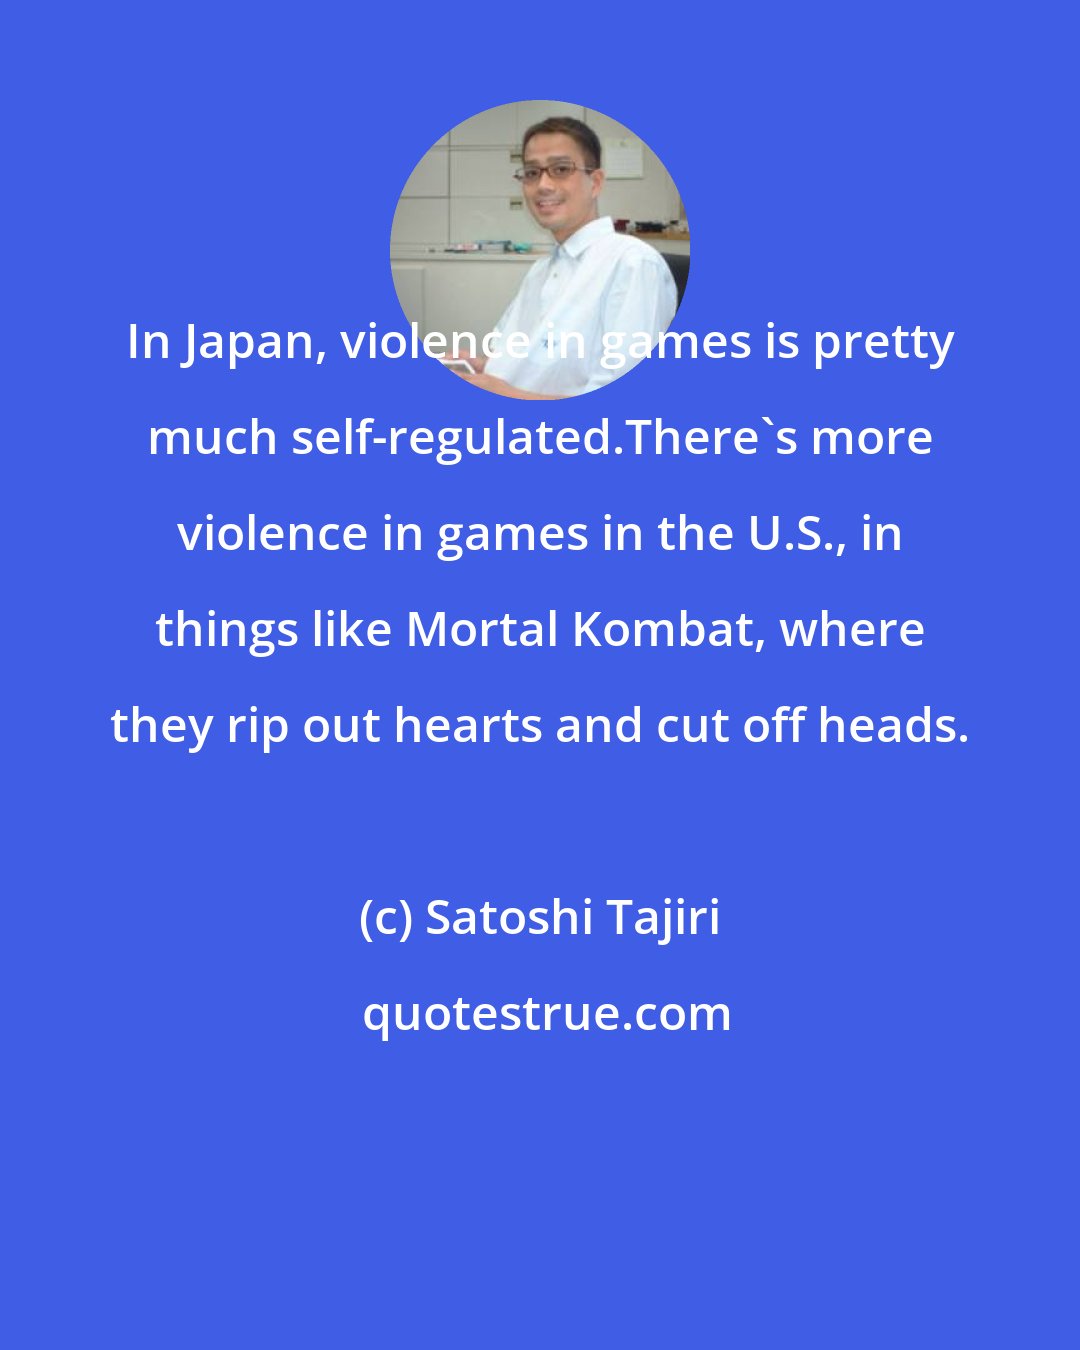 Satoshi Tajiri: In Japan, violence in games is pretty much self-regulated.There's more violence in games in the U.S., in things like Mortal Kombat, where they rip out hearts and cut off heads.